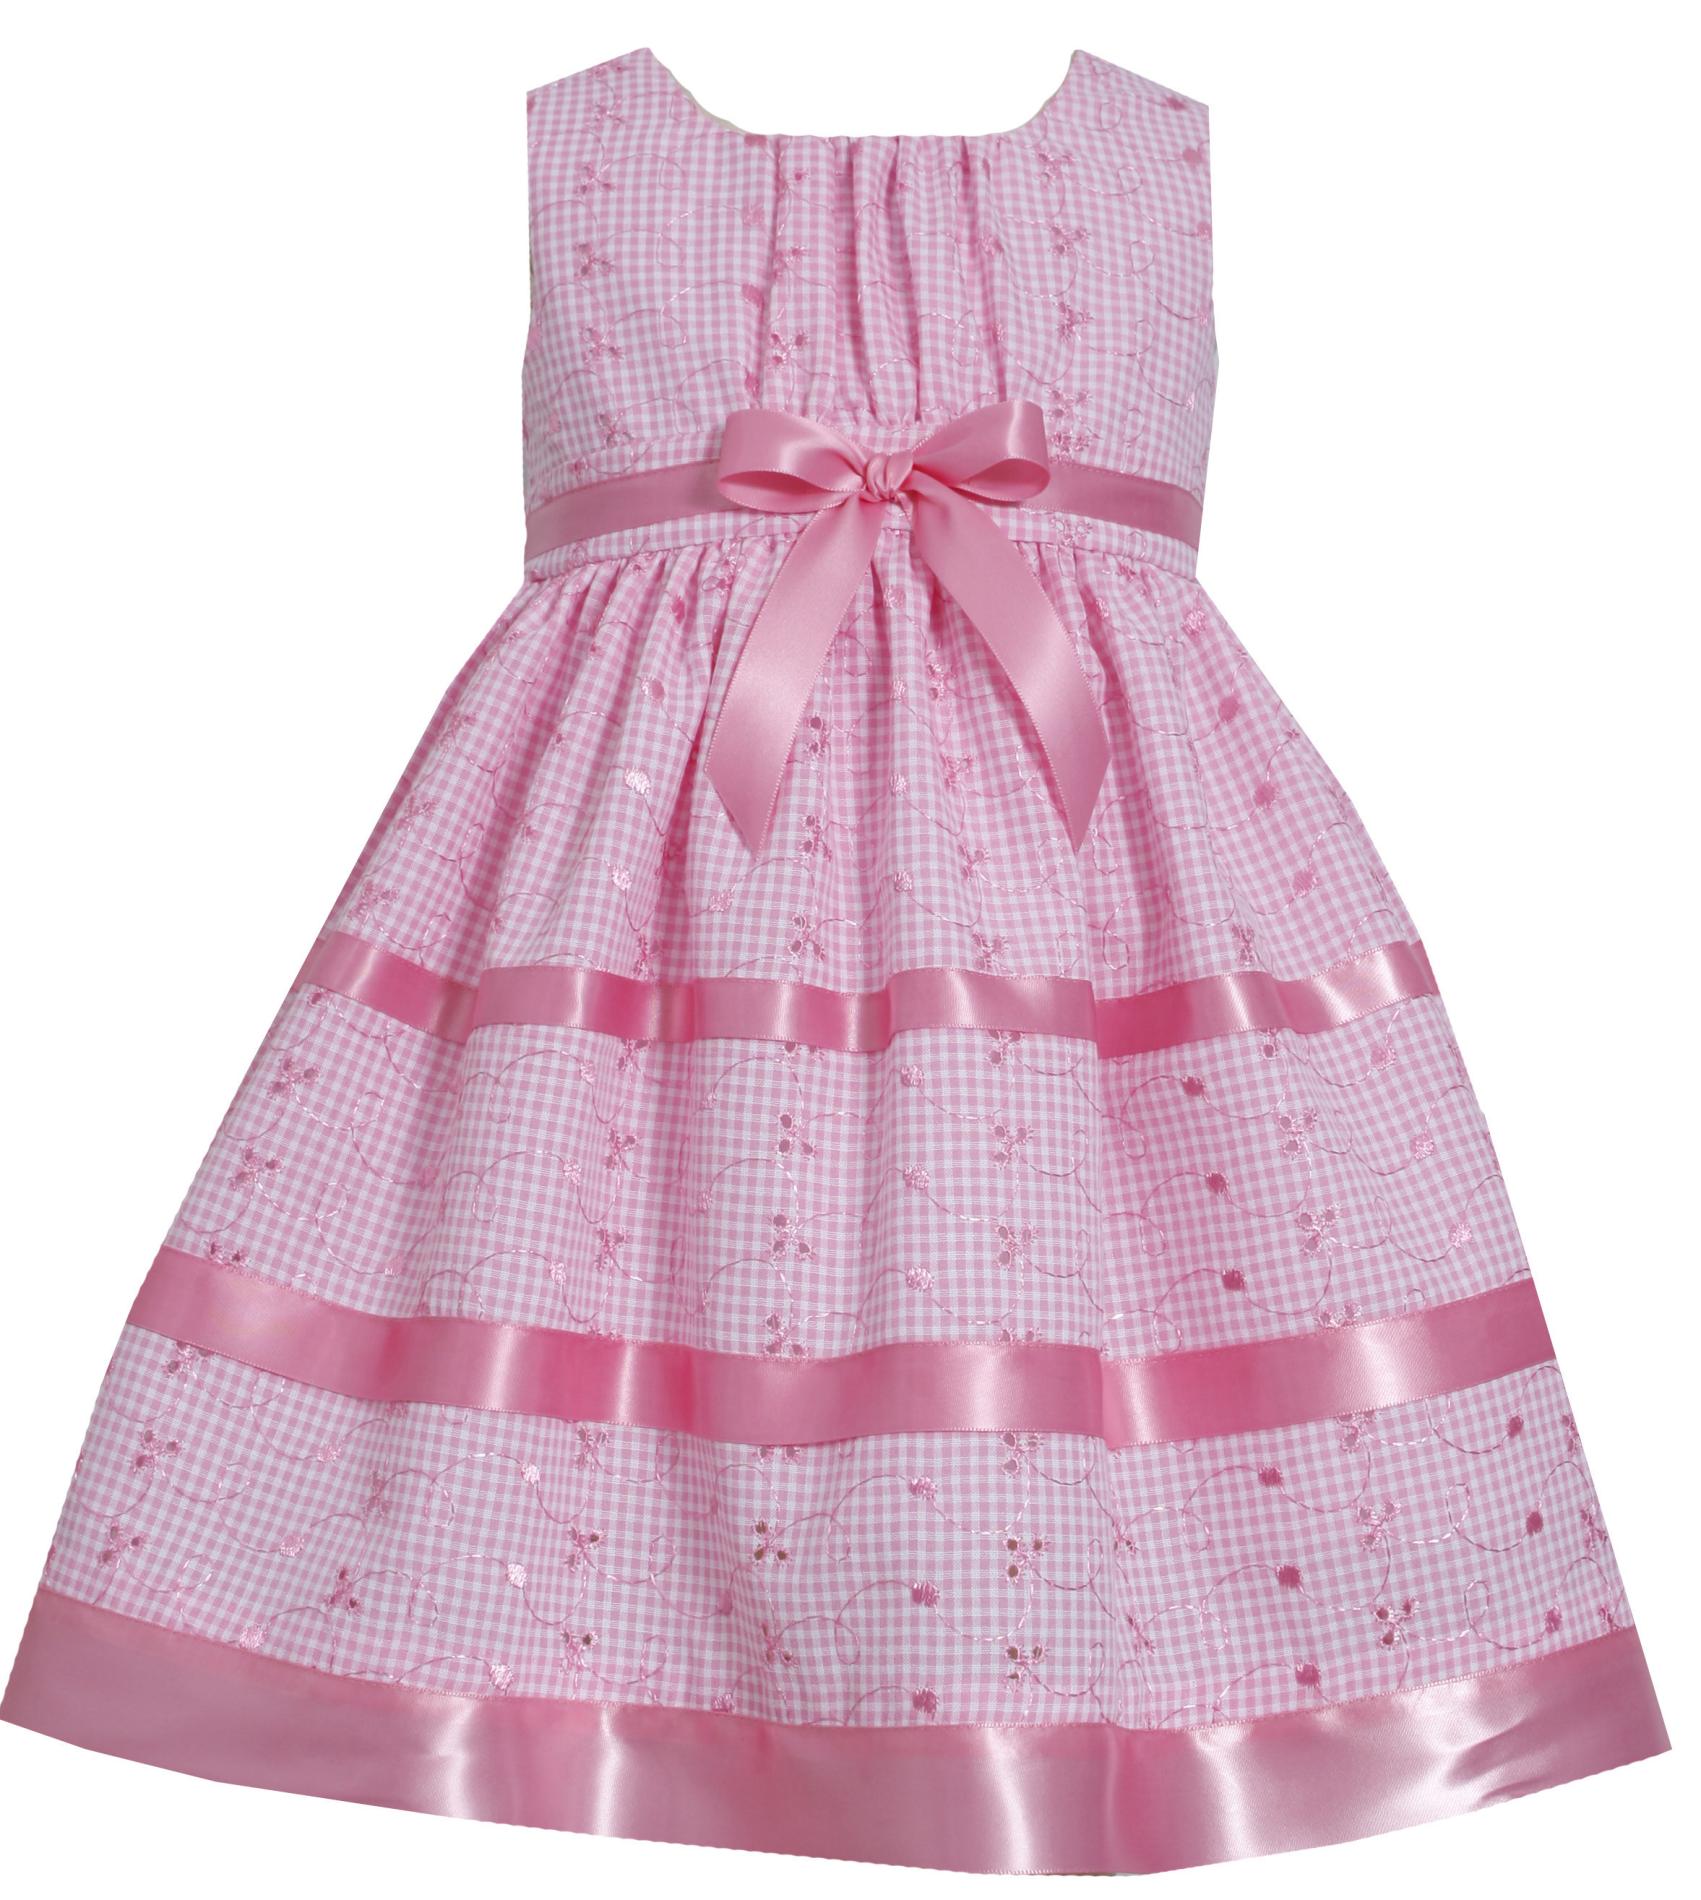 Ashley Ann Toddler Girl's Pleated Party Dress